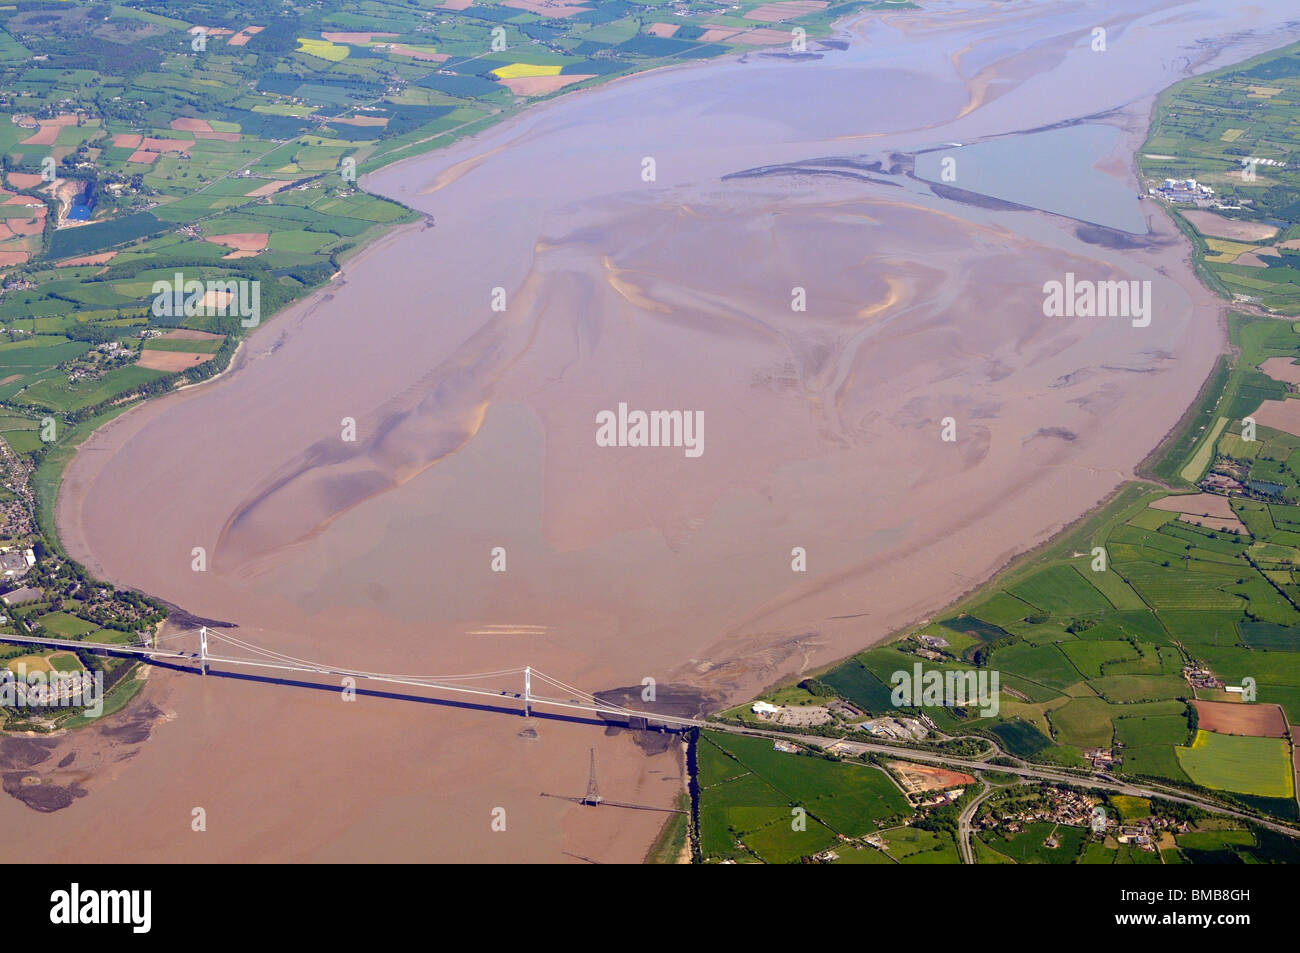 Aerial view of the 1 mile wide Severn Bridge which carries the M48 motorway between England and Wales seen here at low tide. Stock Photo